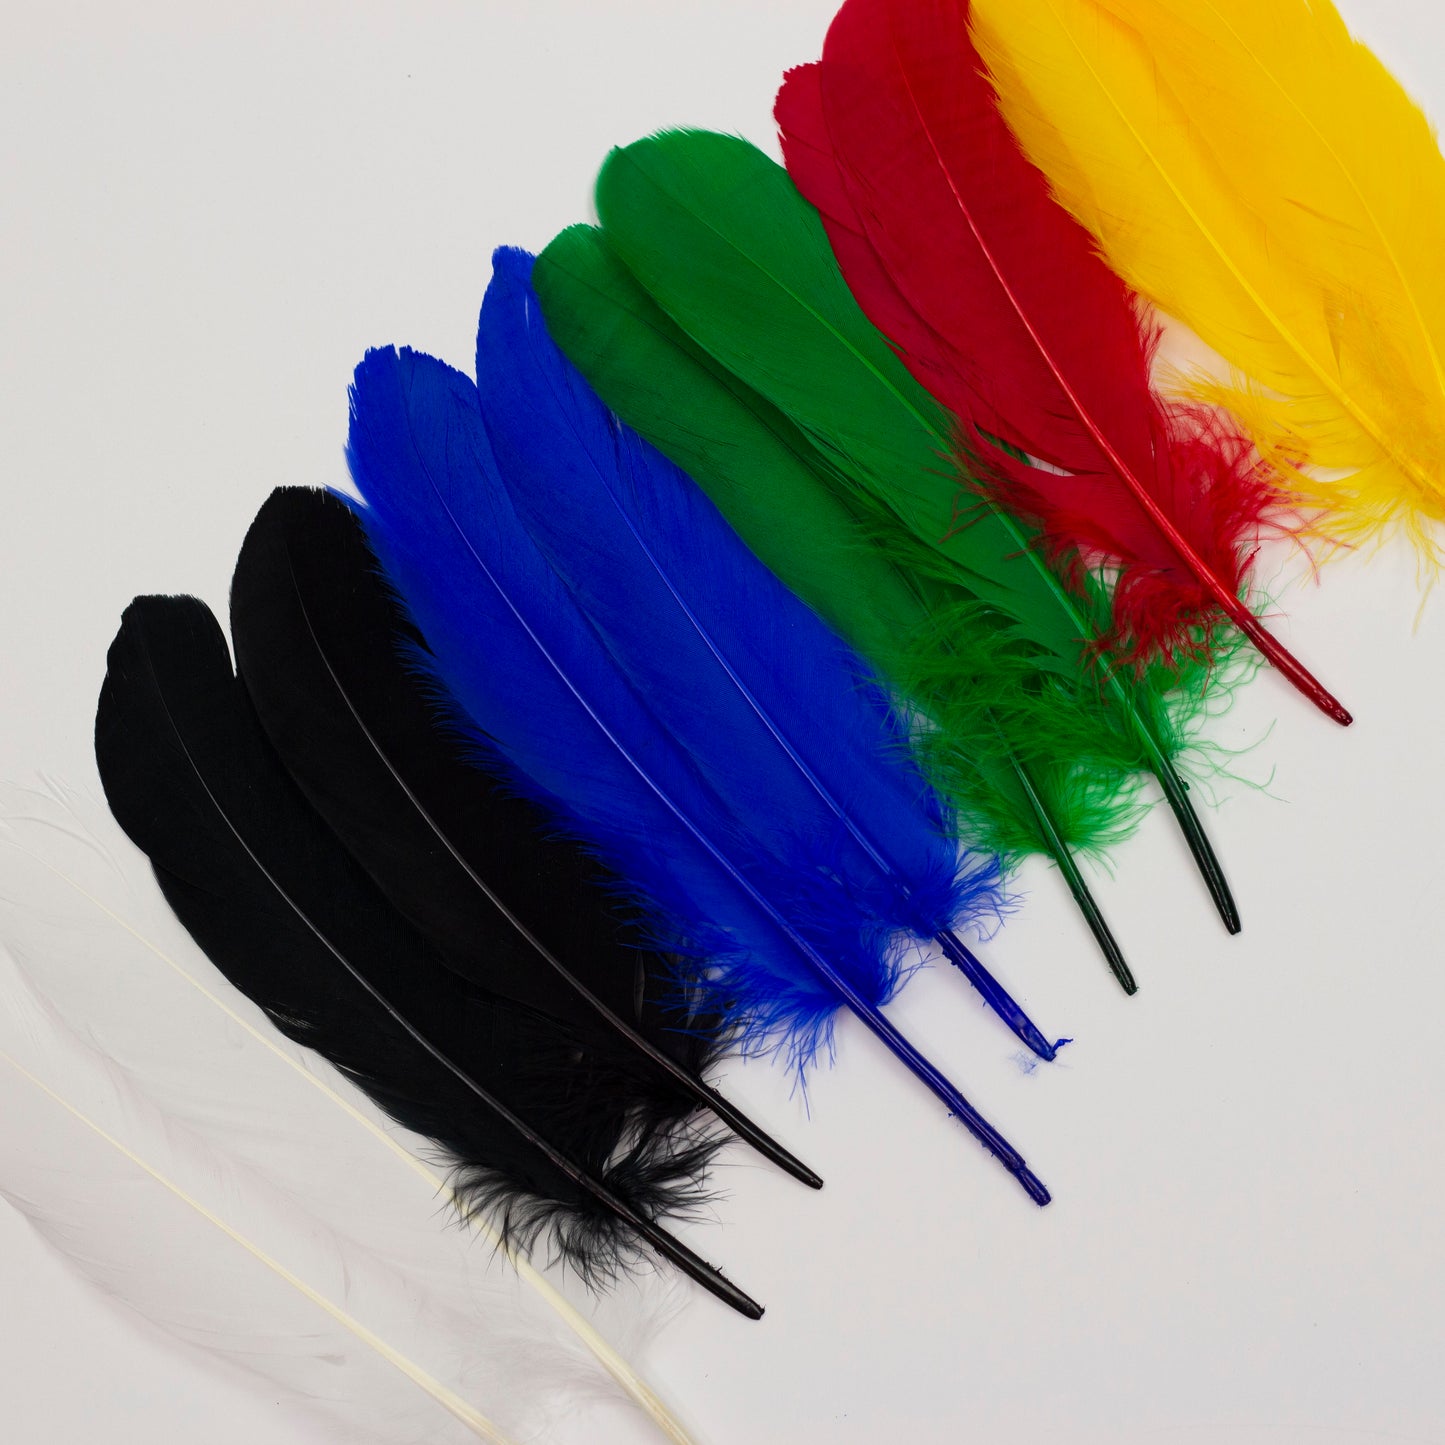 Goose Feathers 7-8" - 12 pcs - Assorted Mix